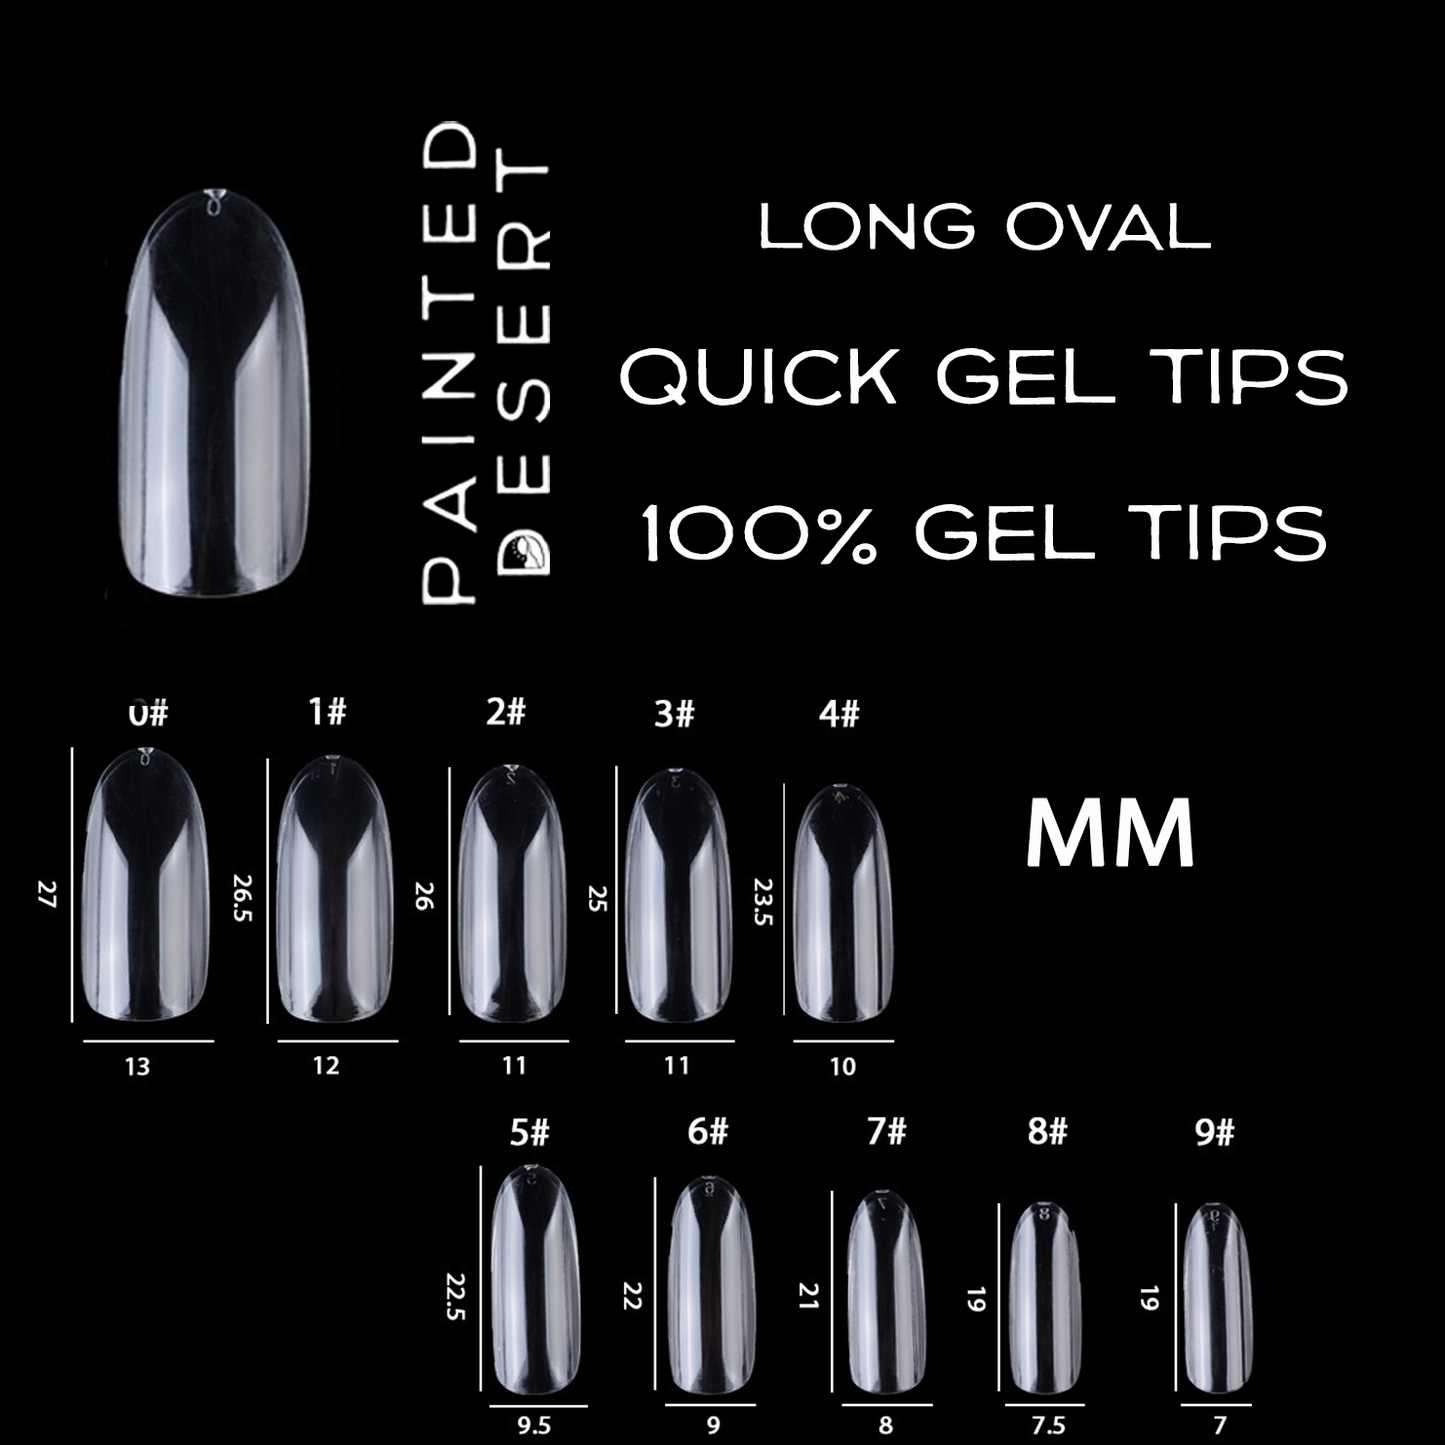 Long Oval Quick Gel Tips